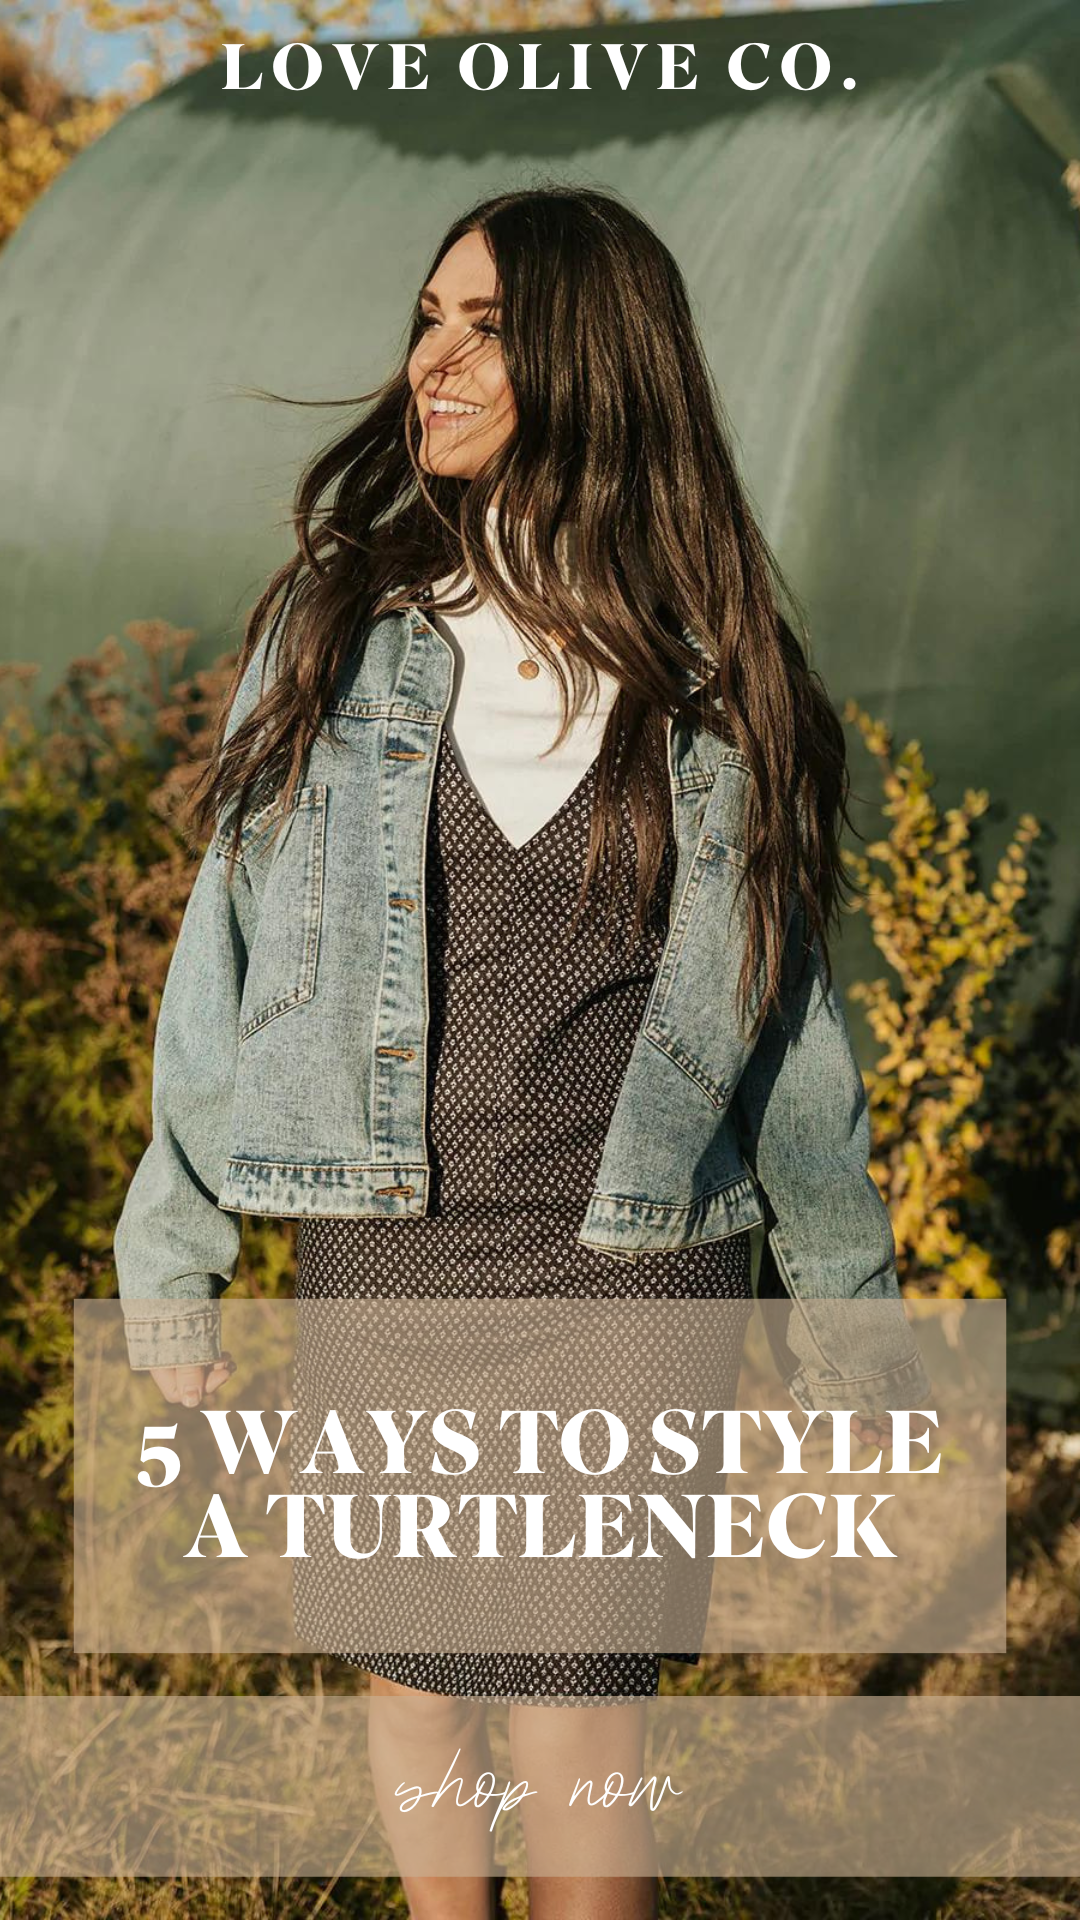 5 ways to style a turtleneck. www.loveoliveco.com